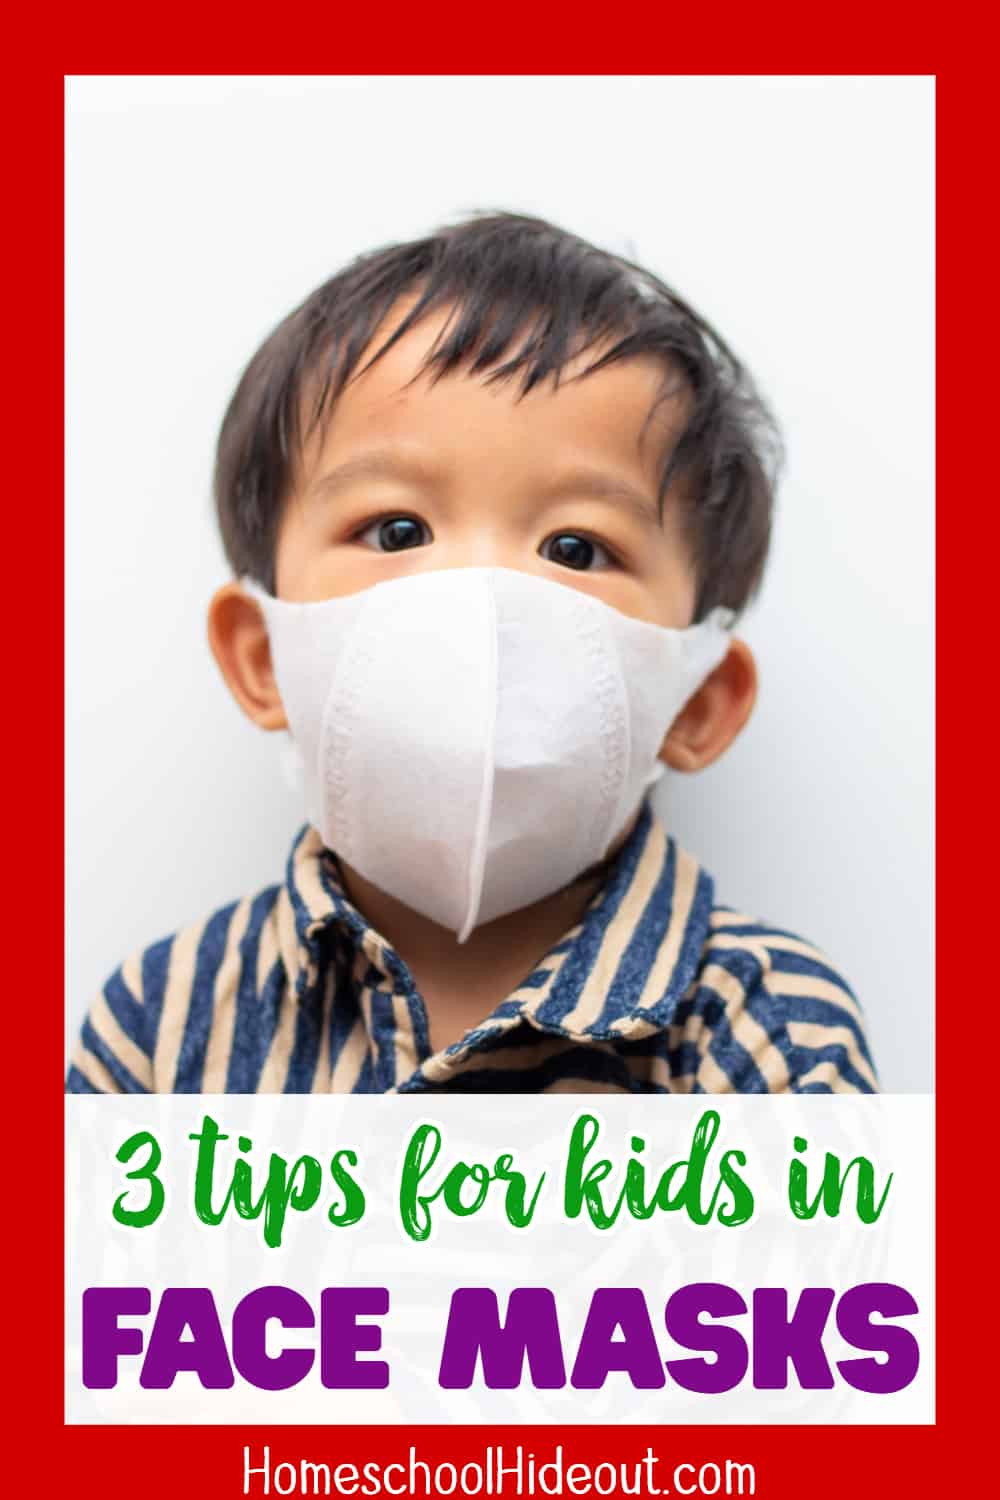 Face masks for kids can be a challenge but with these tips, you can make them more comfy and appealing to all ages!